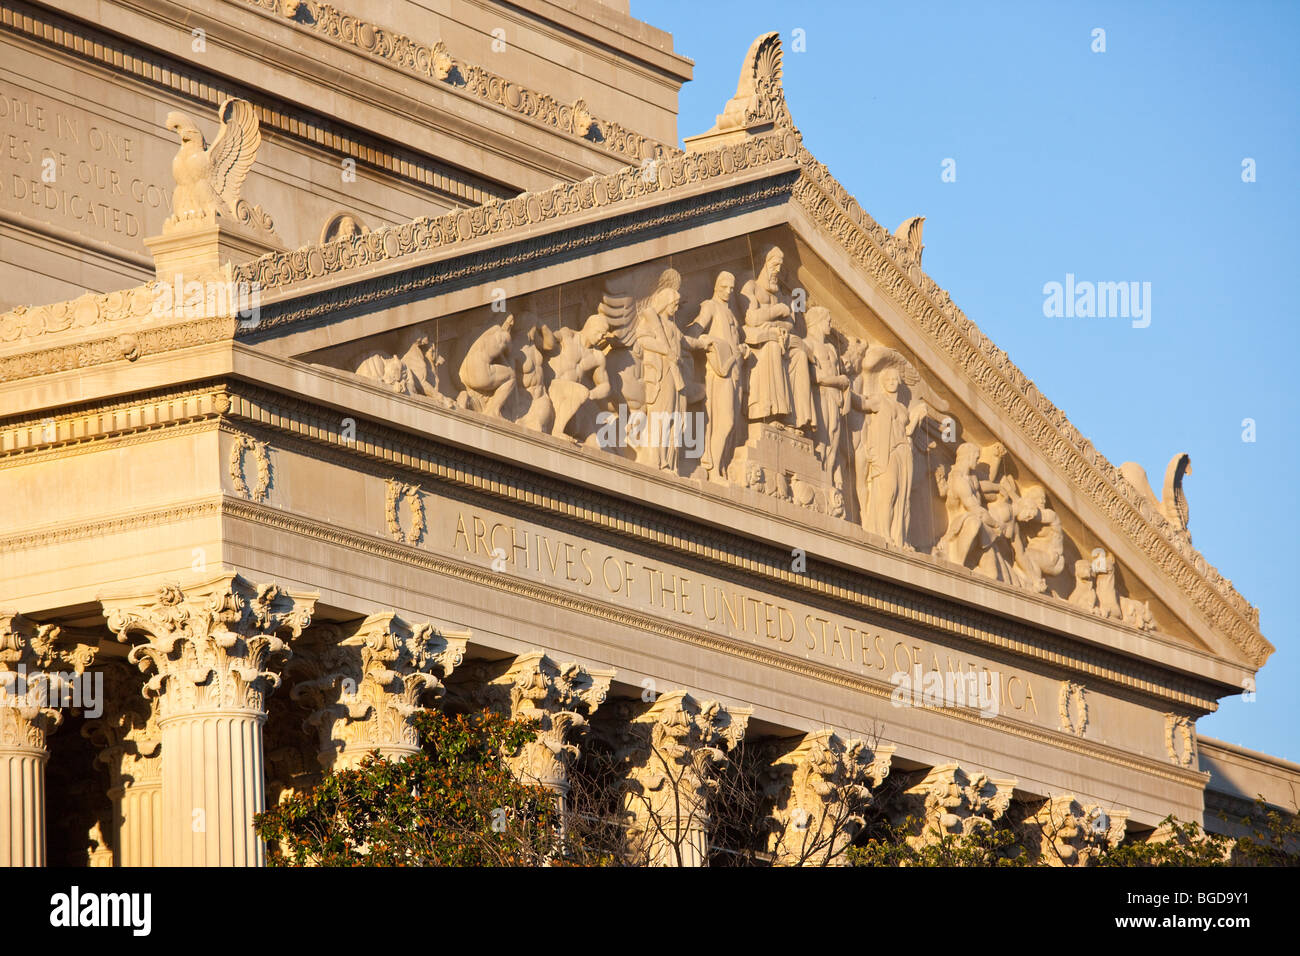 Archives of the United States of America Building in Washington DC Stock Photo